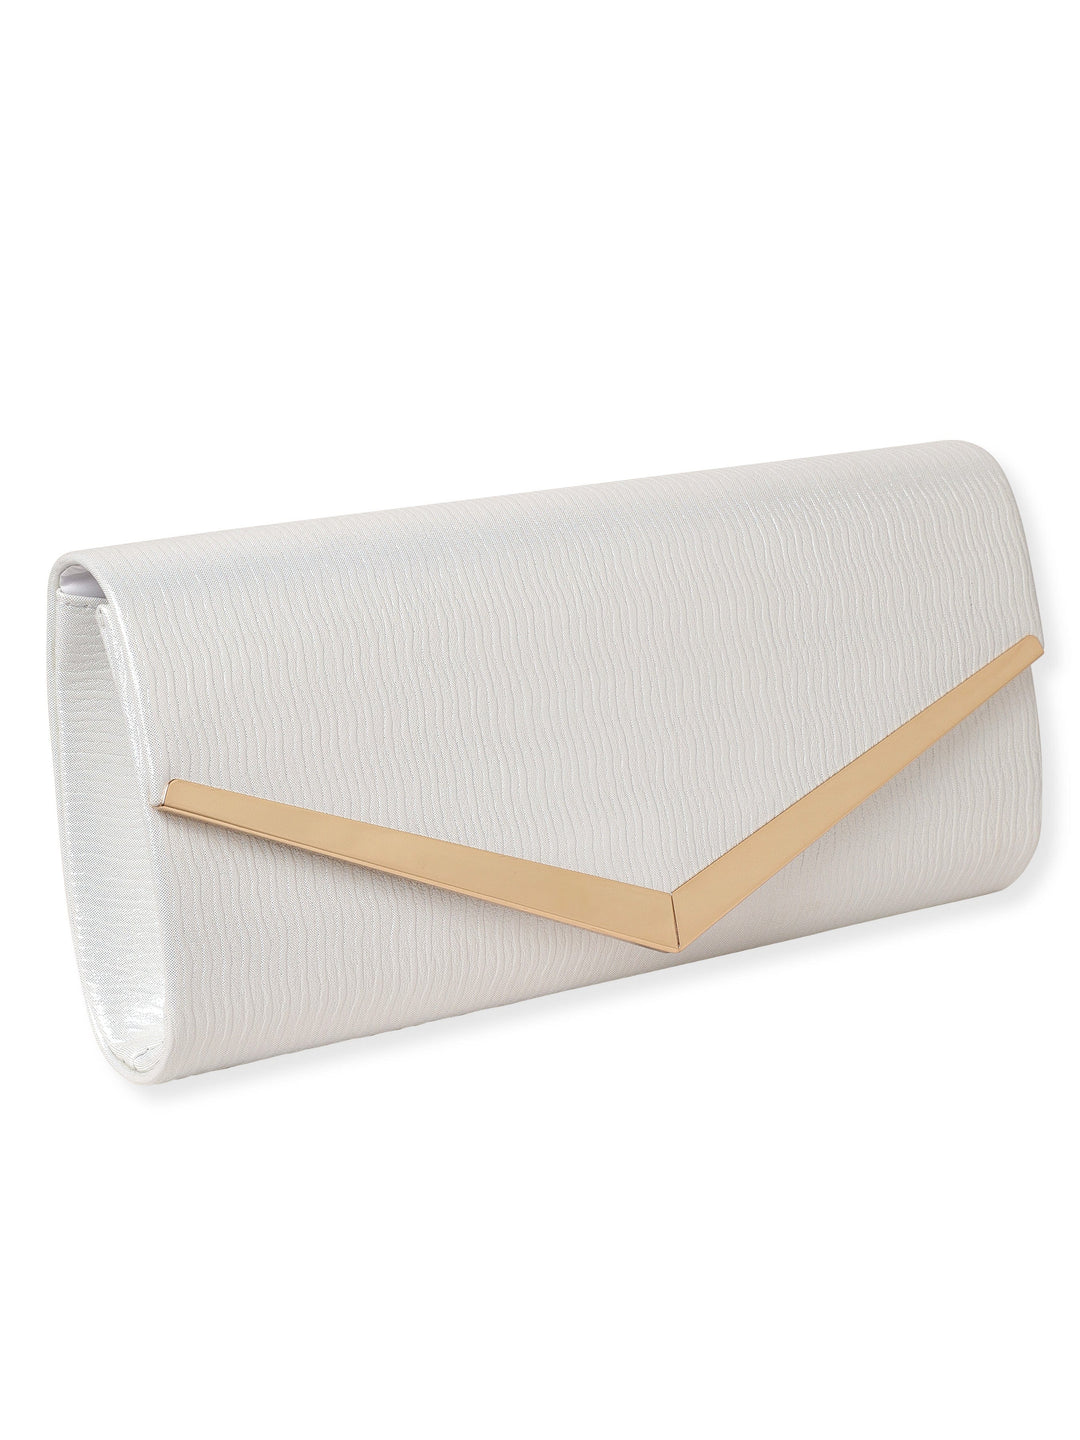 Rubans Chic Simplicity Handcrafted Beige Textured Glossy Finish Clutch Bag Handbag, Wallet Accessories & Clutches